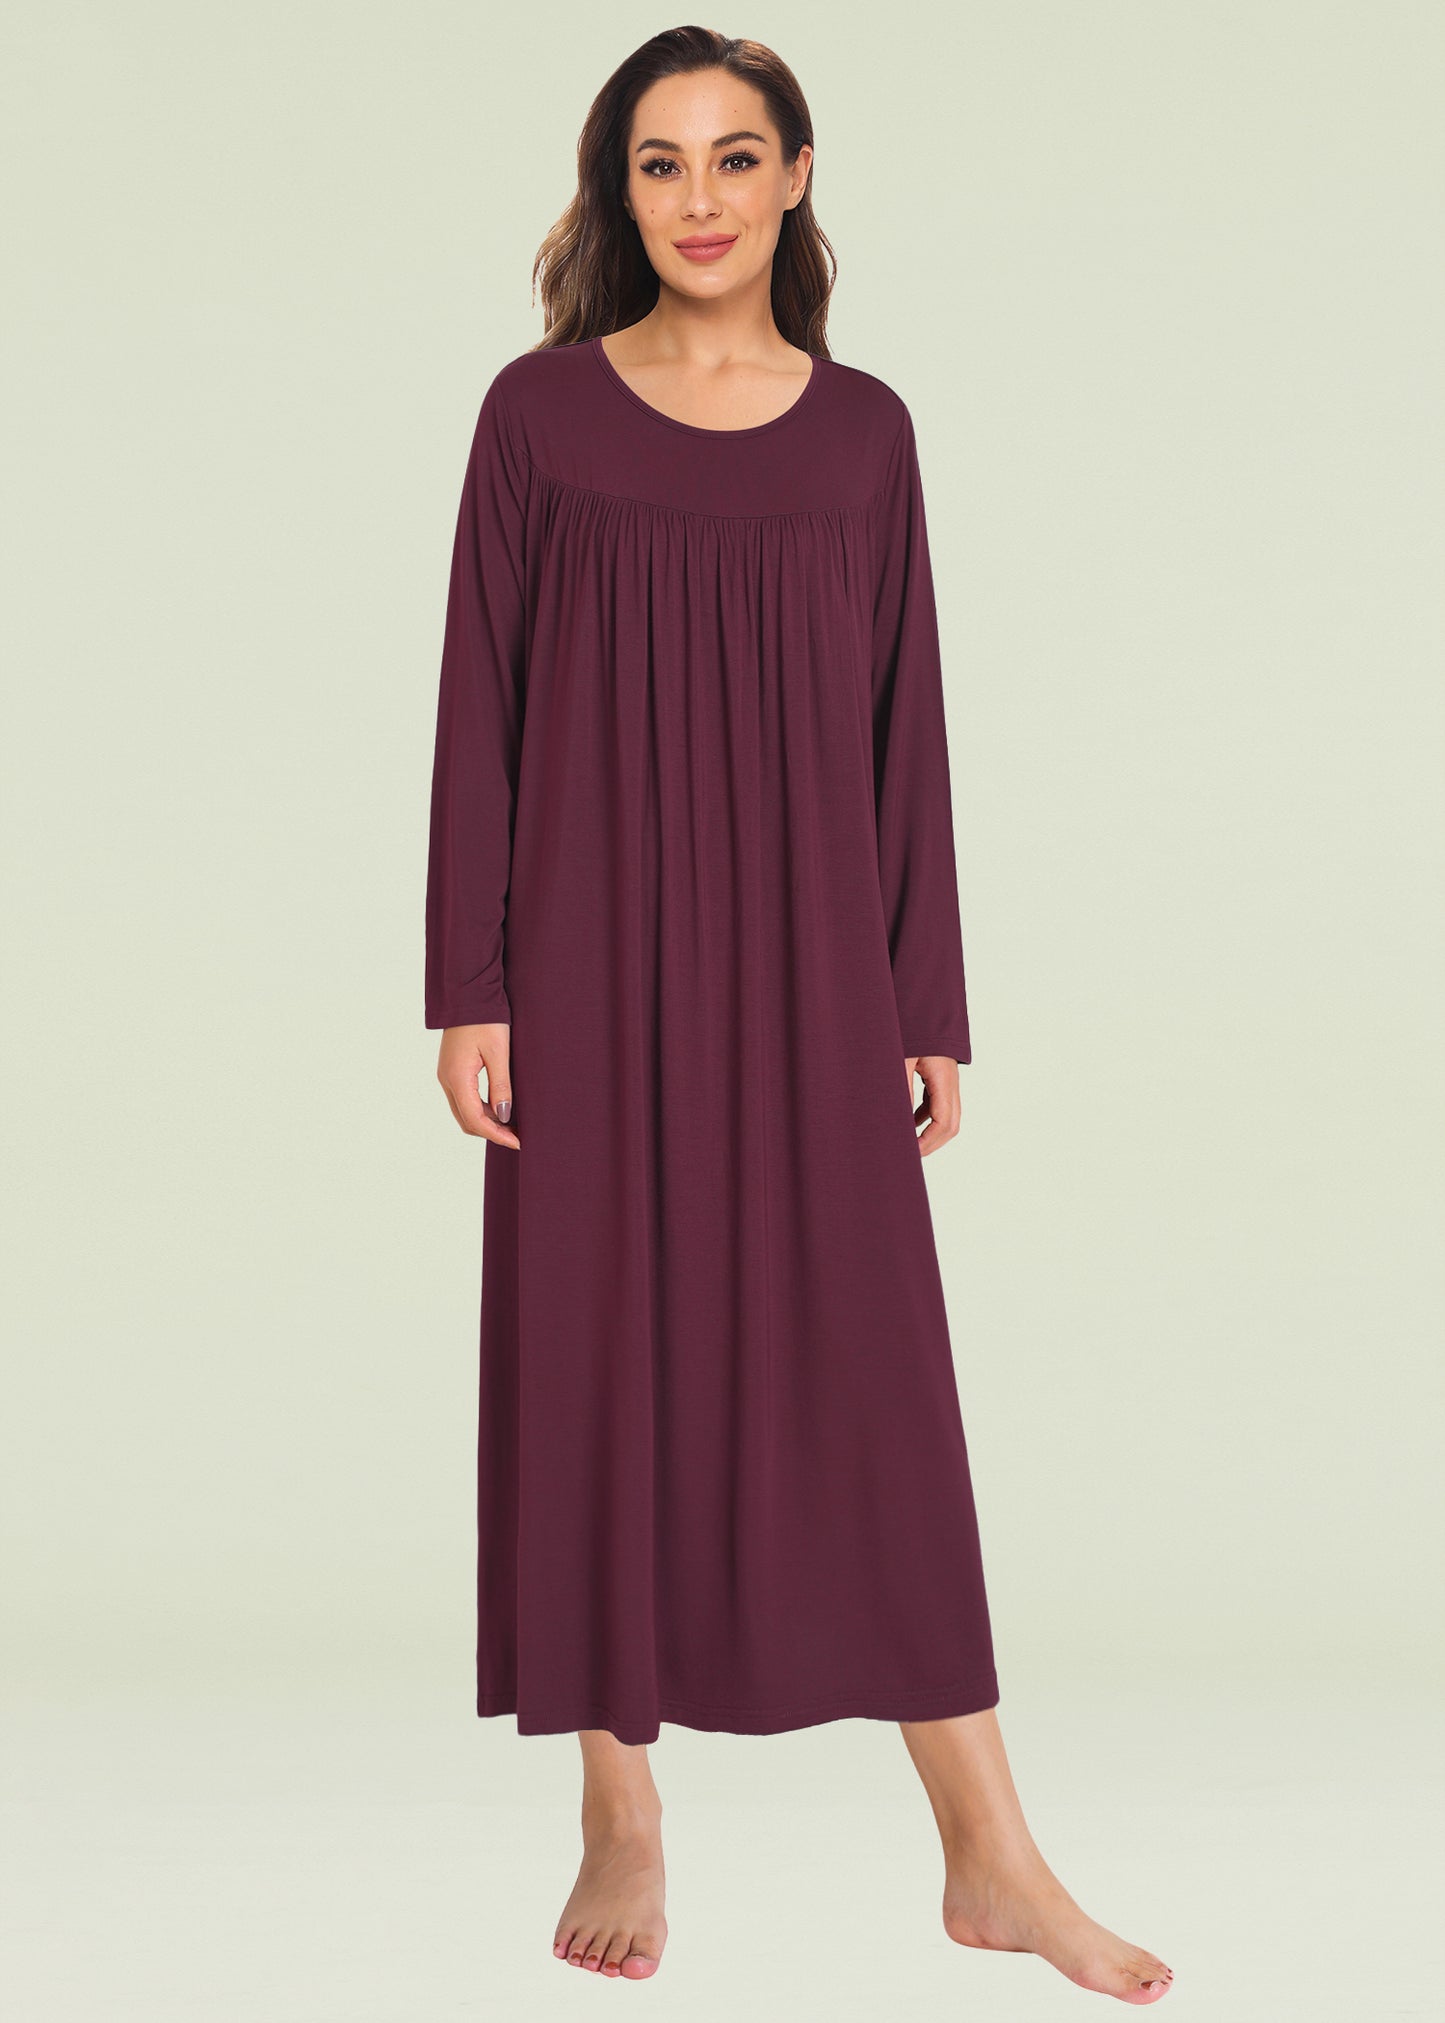 Women's Soft Bamboo Viscose Long Sleeves Nightgown